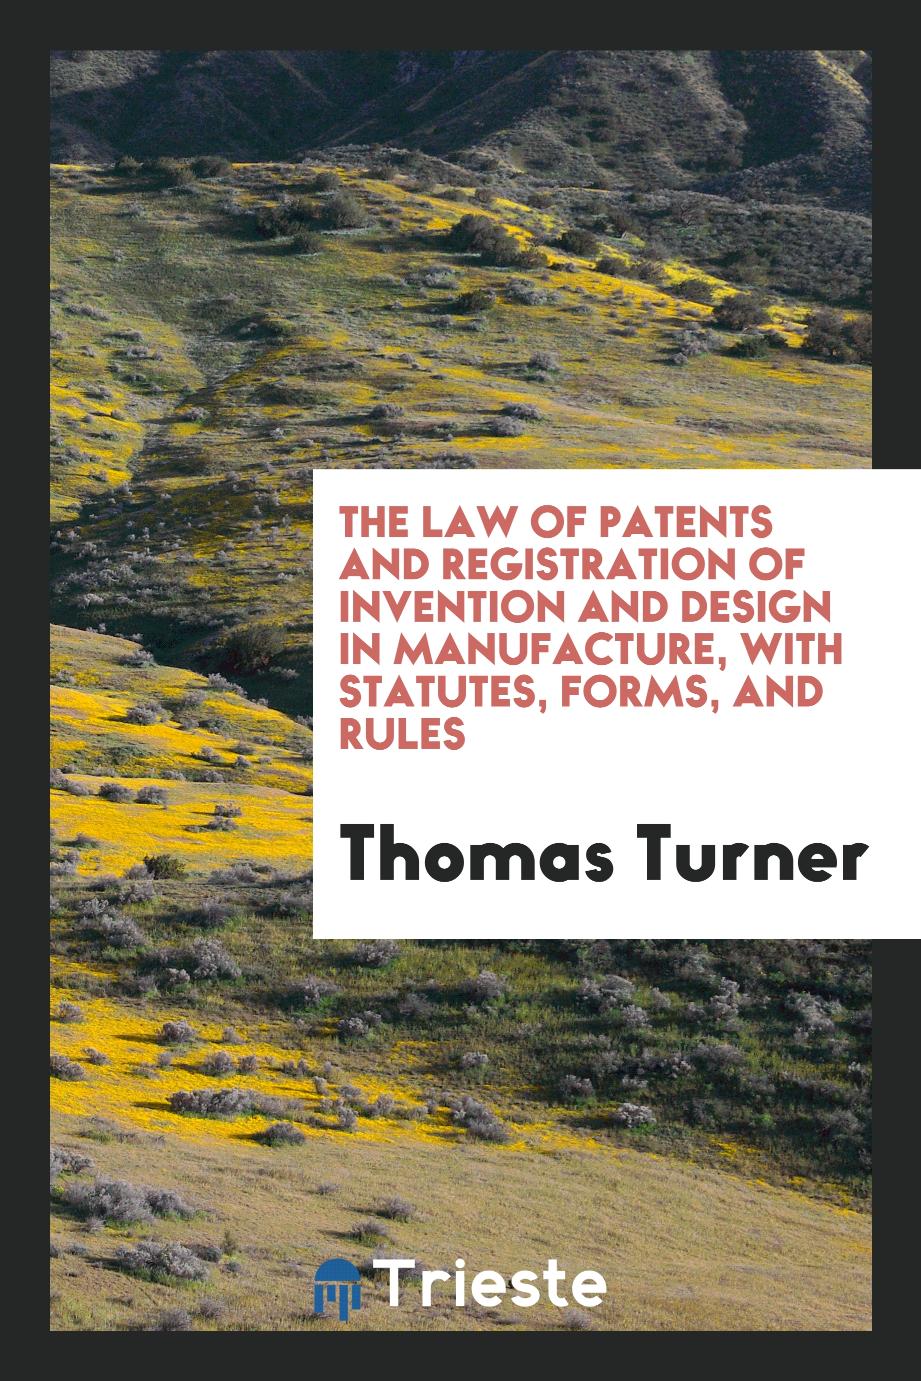 The Law of Patents and Registration of Invention and Design in Manufacture, with Statutes, Forms, and Rules